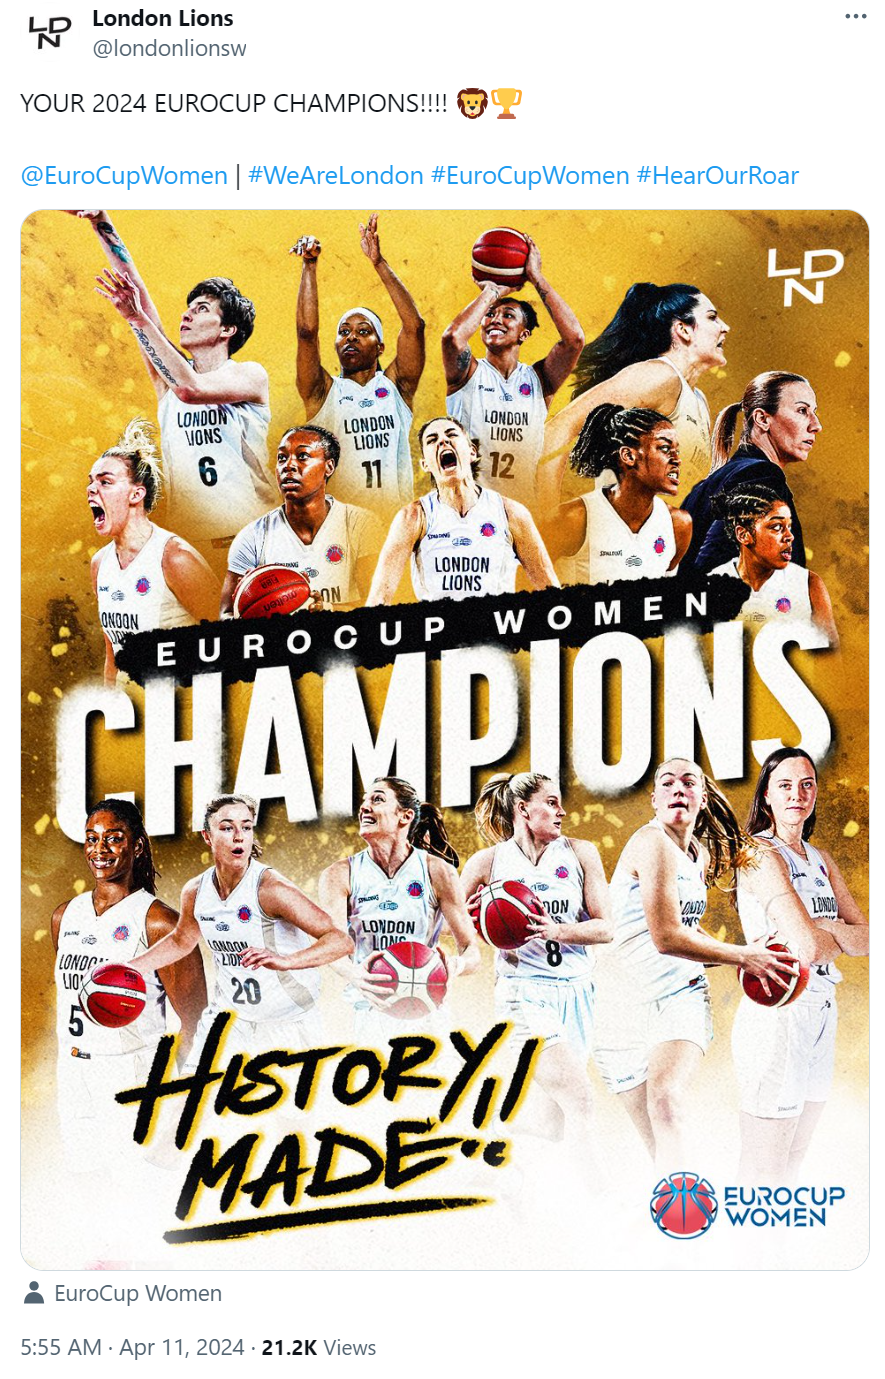 London Lions' tweet on April 11 about their title win. /@londonlionsw